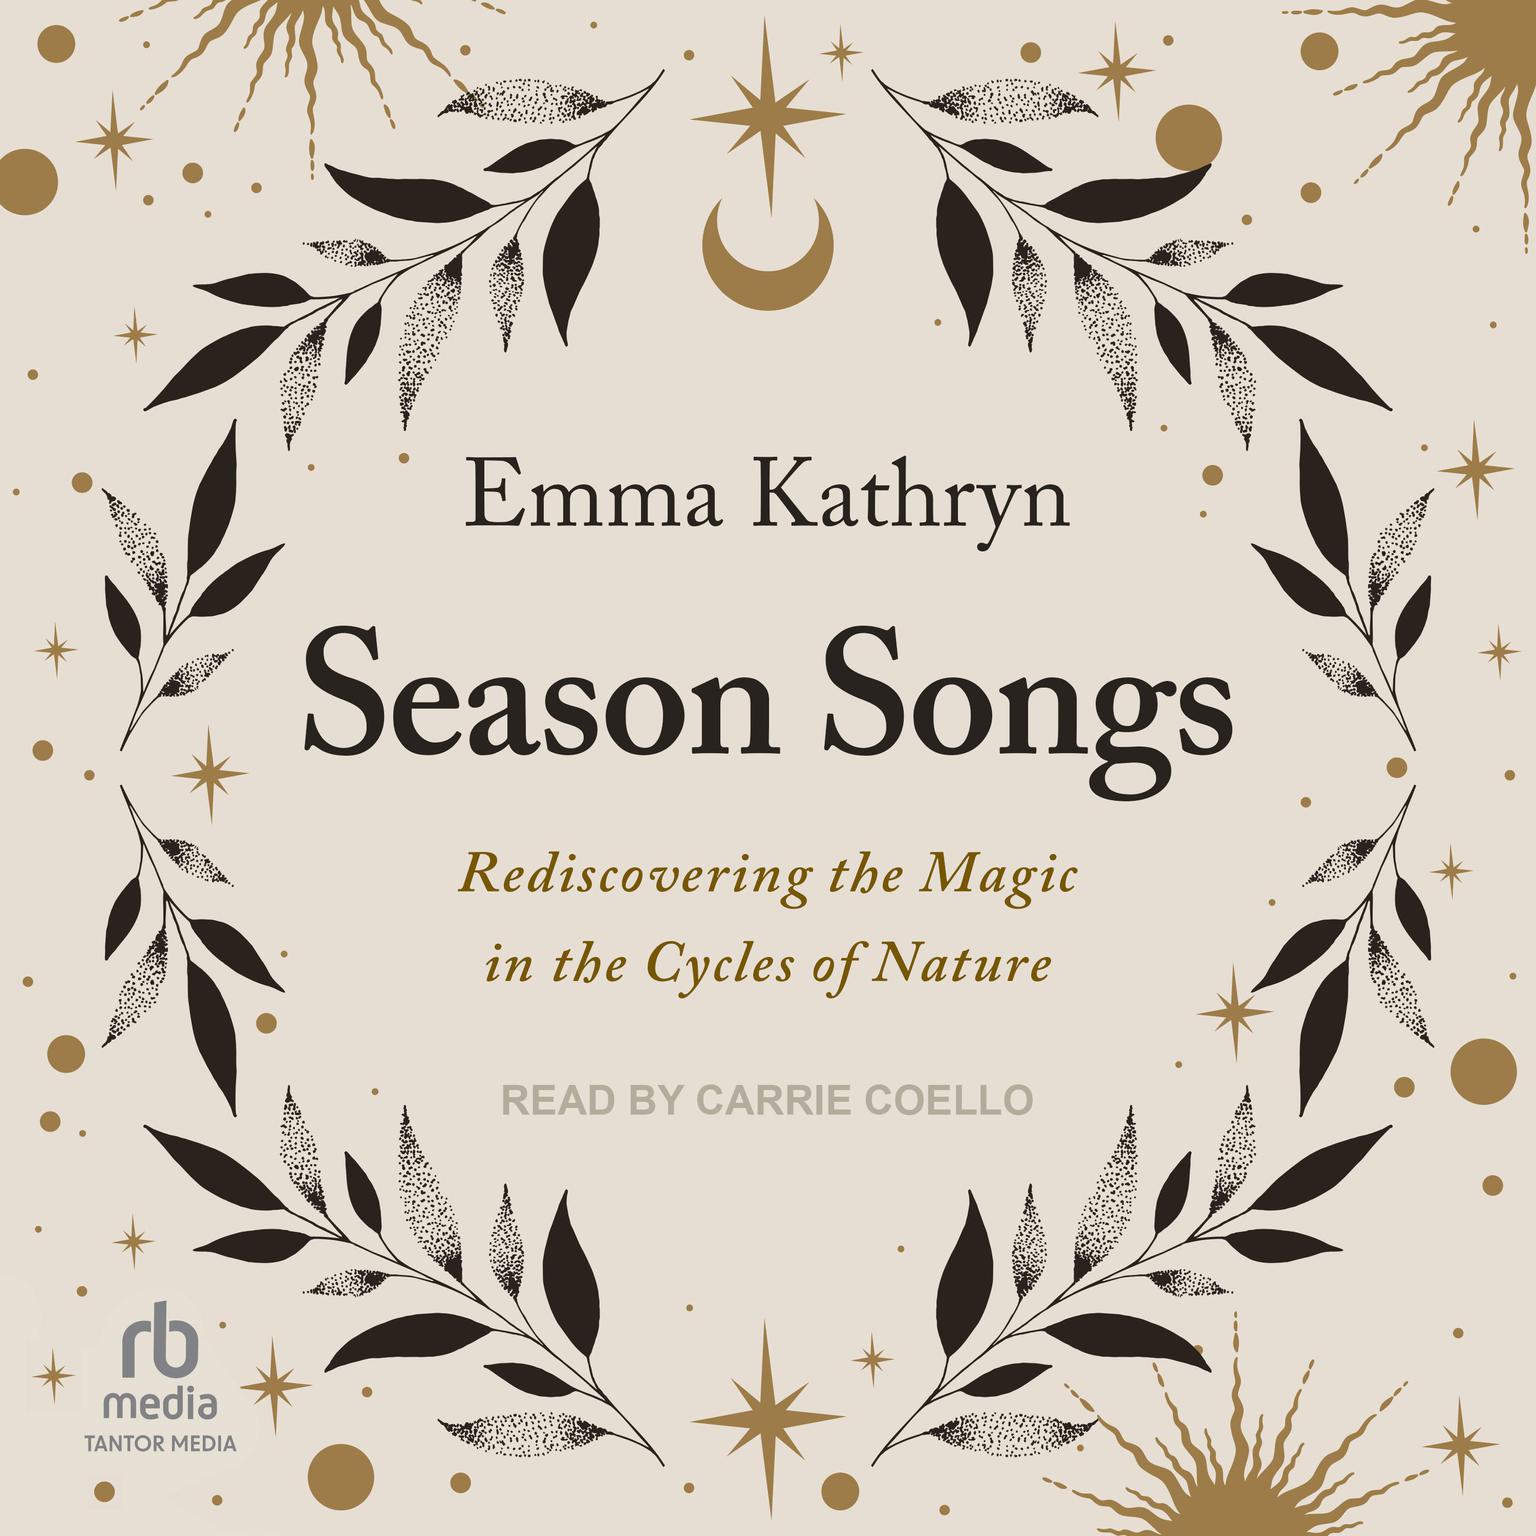 Season Songs: Rediscovering the Magic in the Cycles of Nature Audiobook, by Emma Kathryn